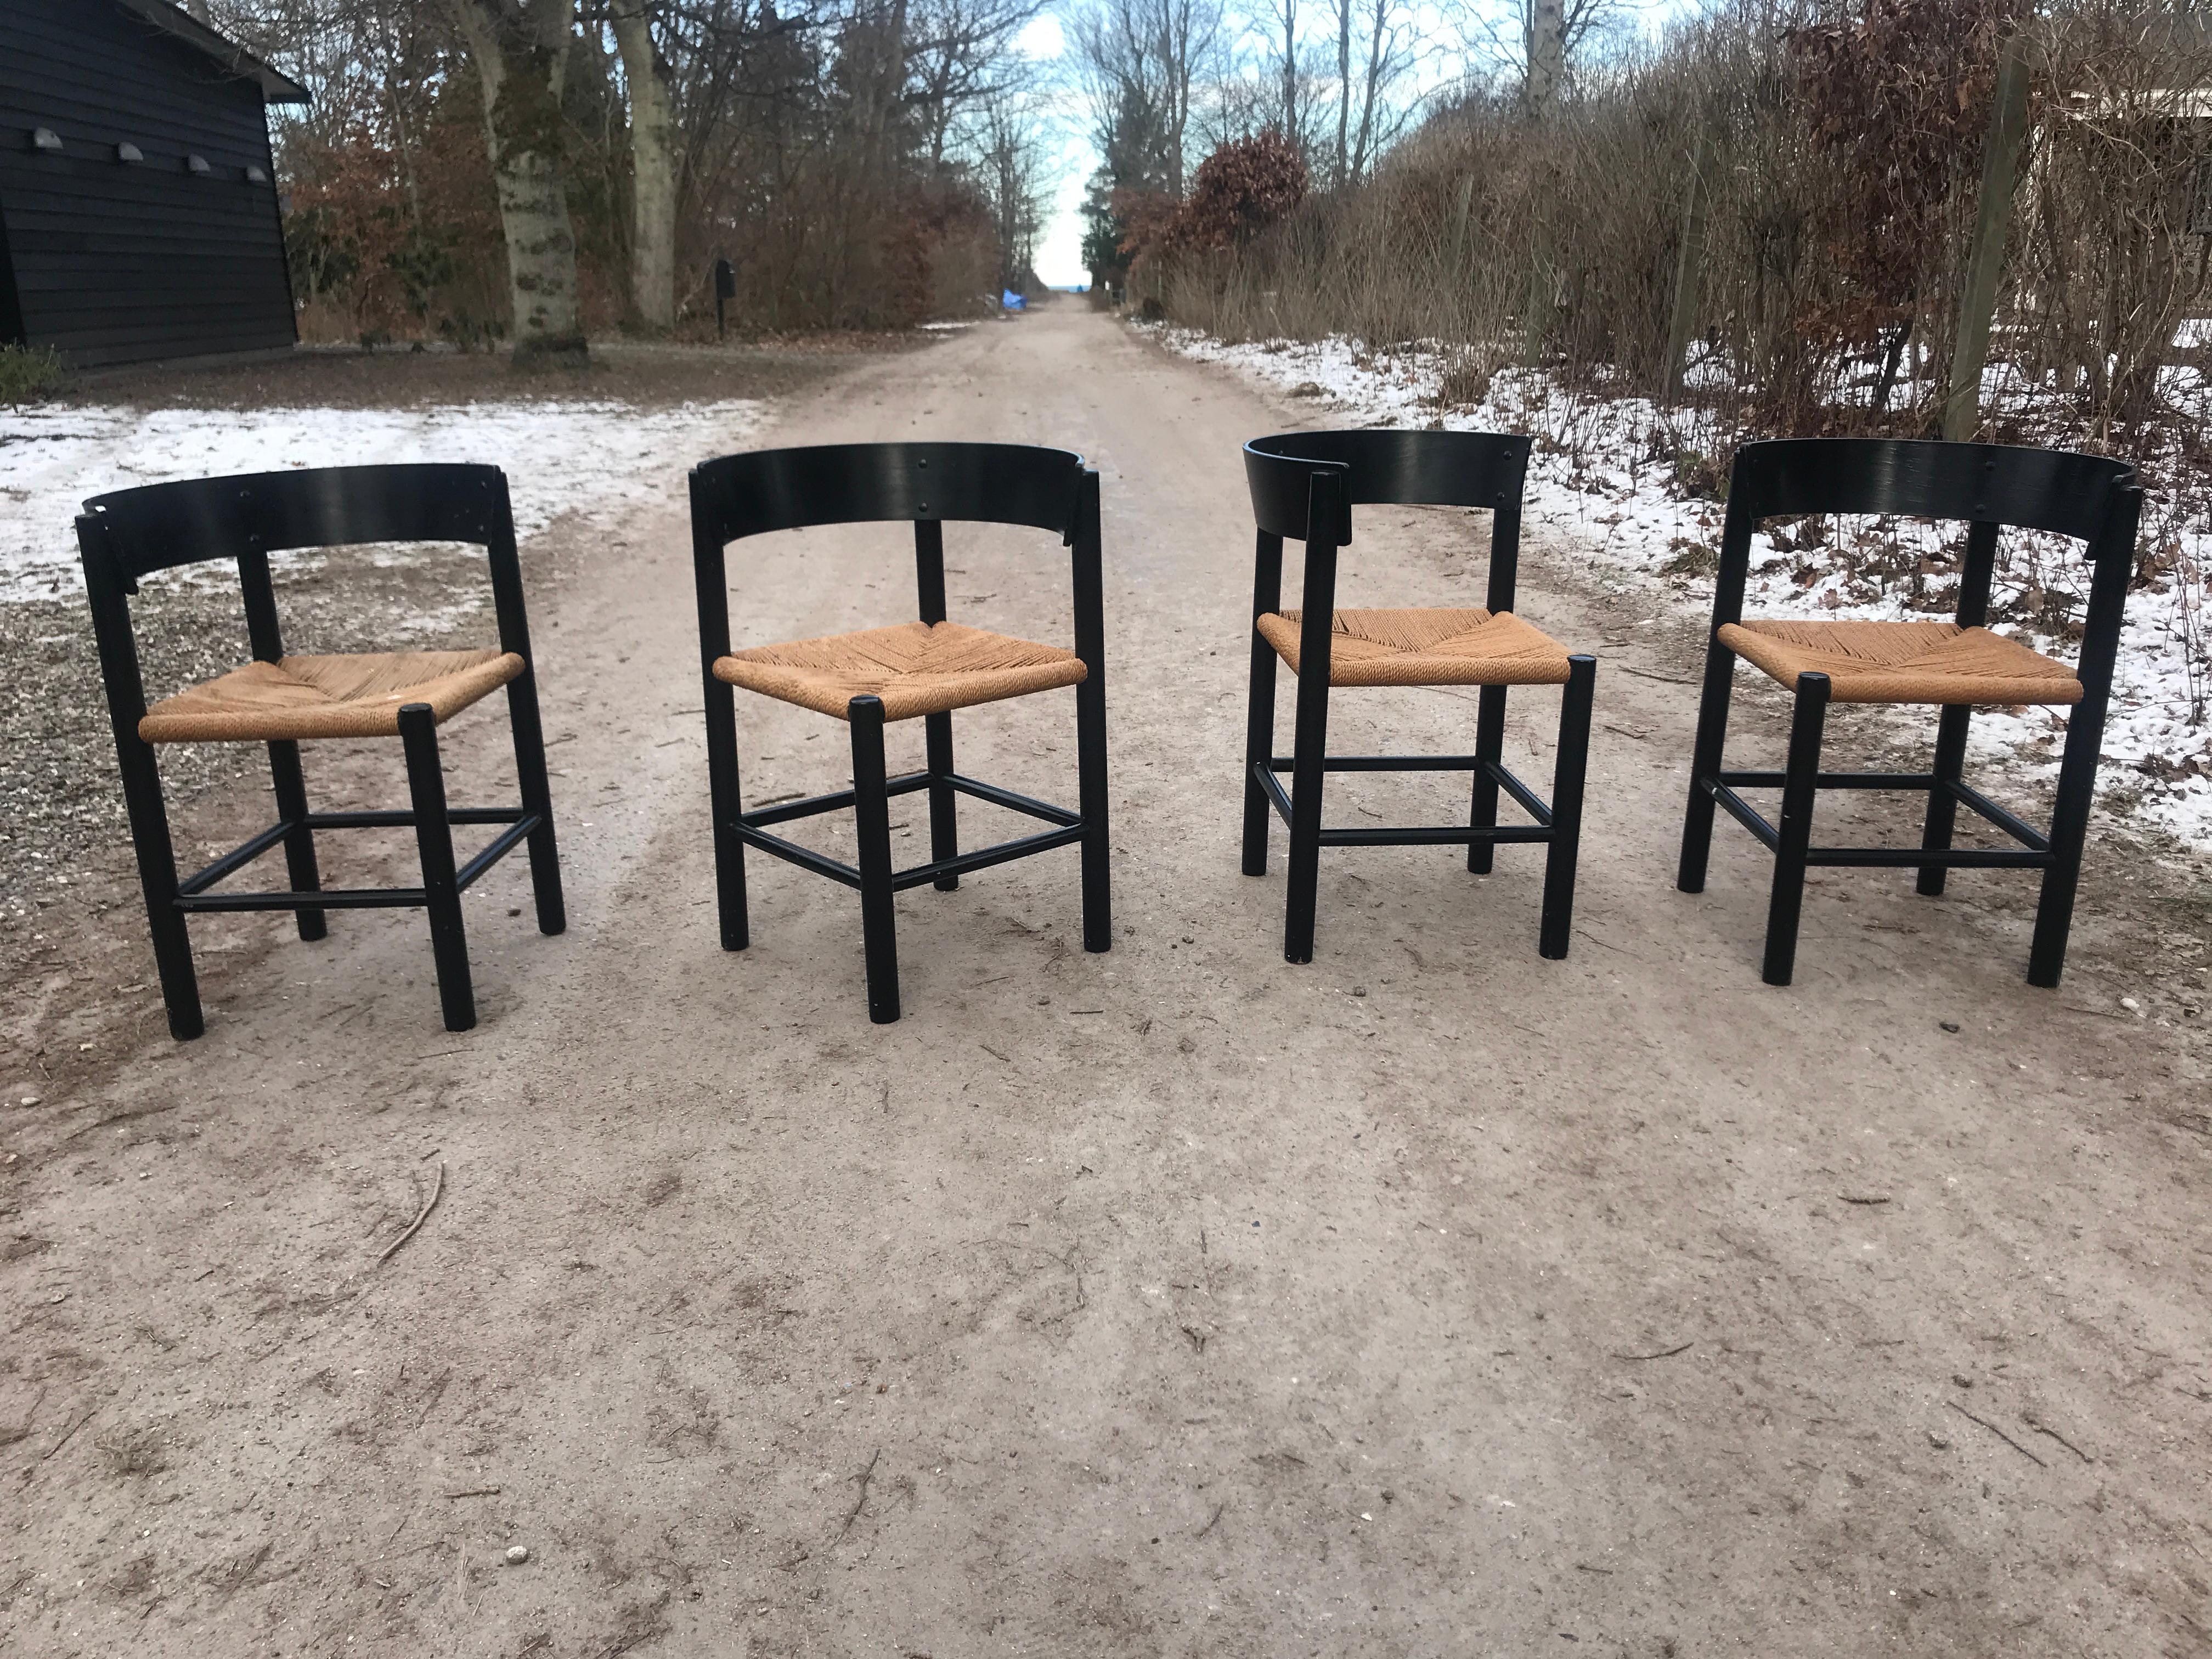 The Corner chairs from Fritz Hansen are hard to find. These 4 in original vintage condition needs a little work to become as unique as they deserve to be.